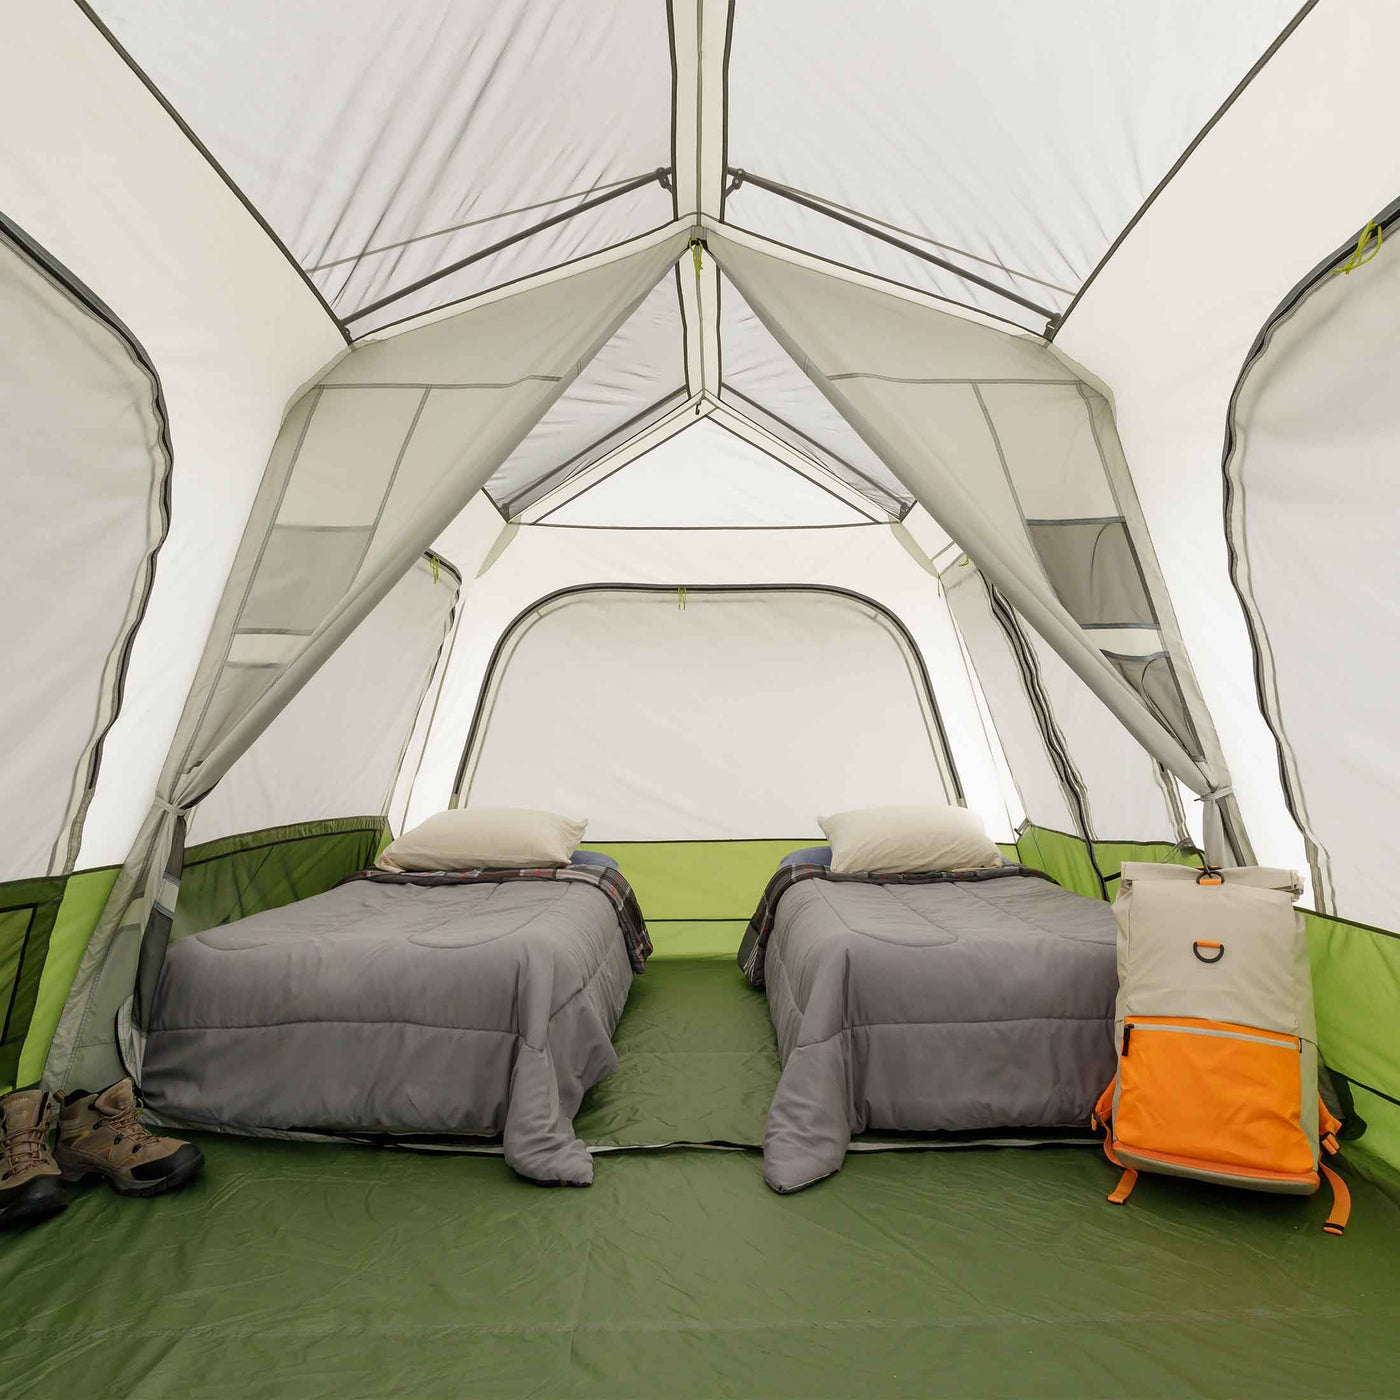 8 people tent